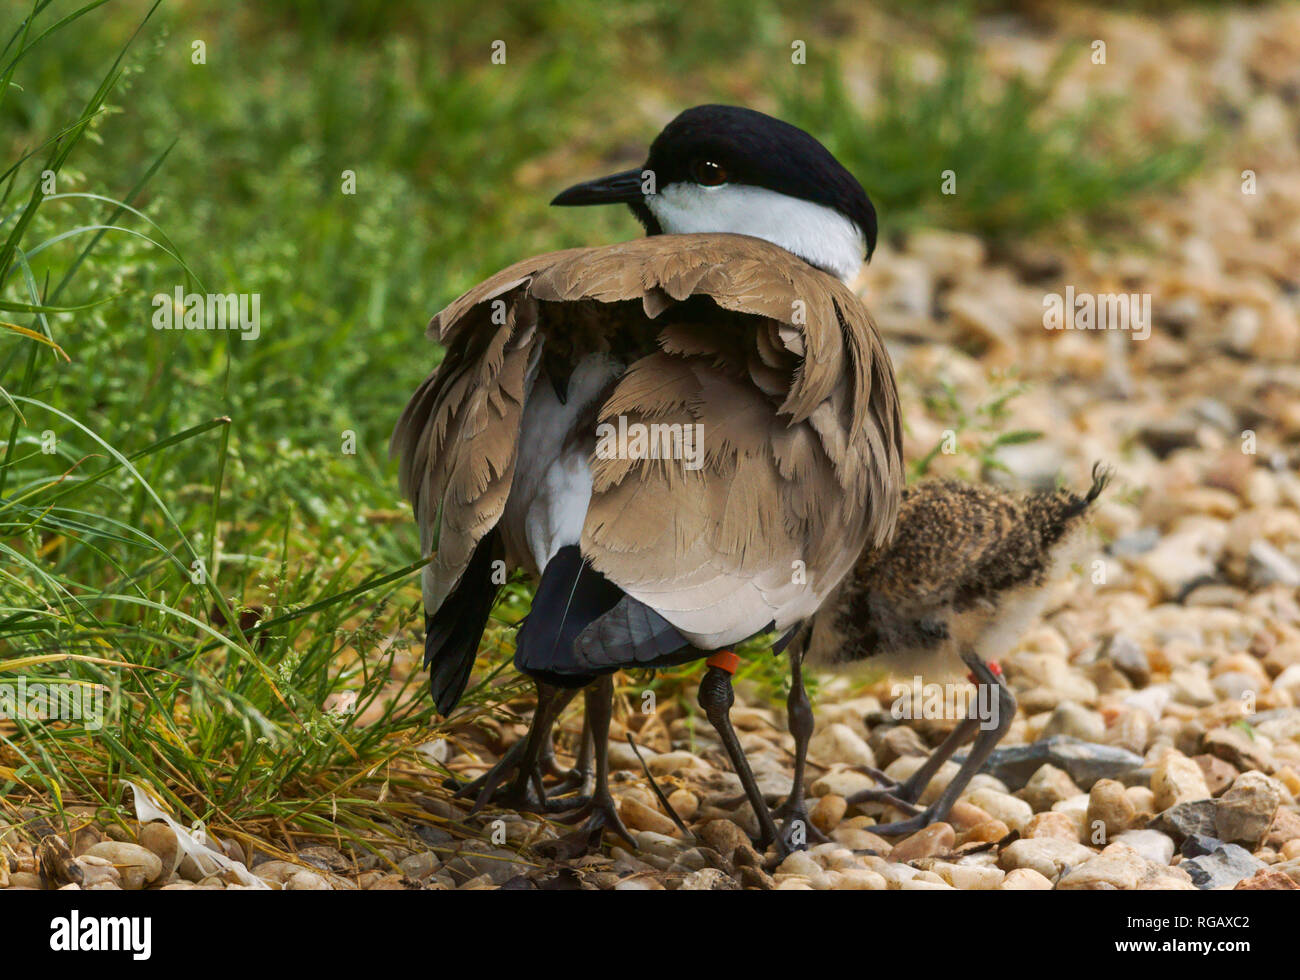 Spur-winged Plover (Hoplopterus spinosus).Adult with young hiding underneath her. Stock Photo